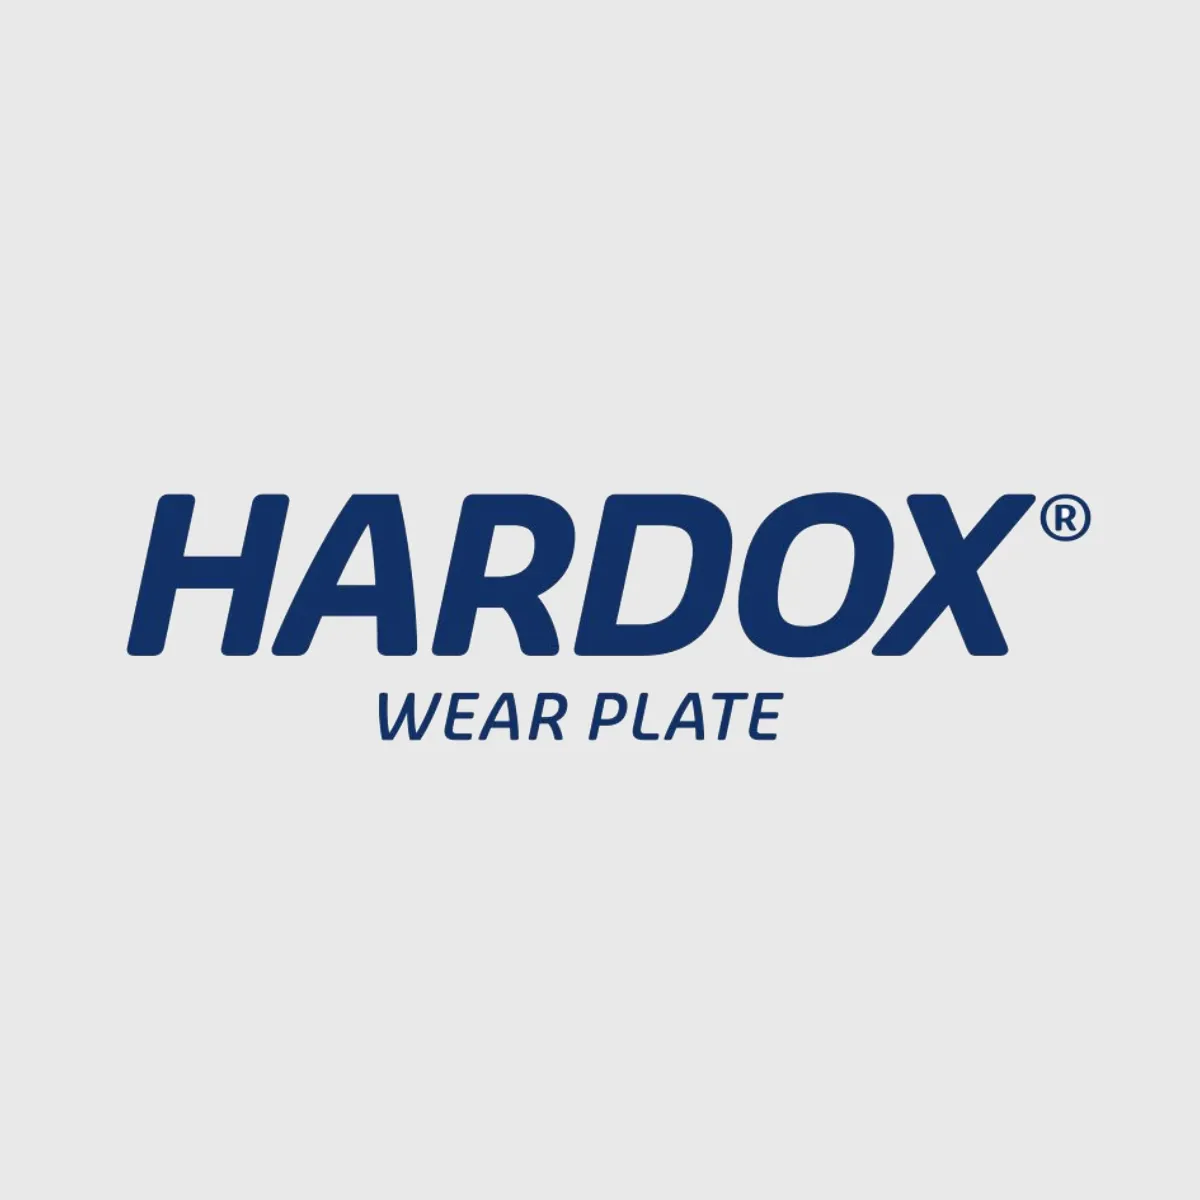 Equip your tipping container with an extra Hardox bottom